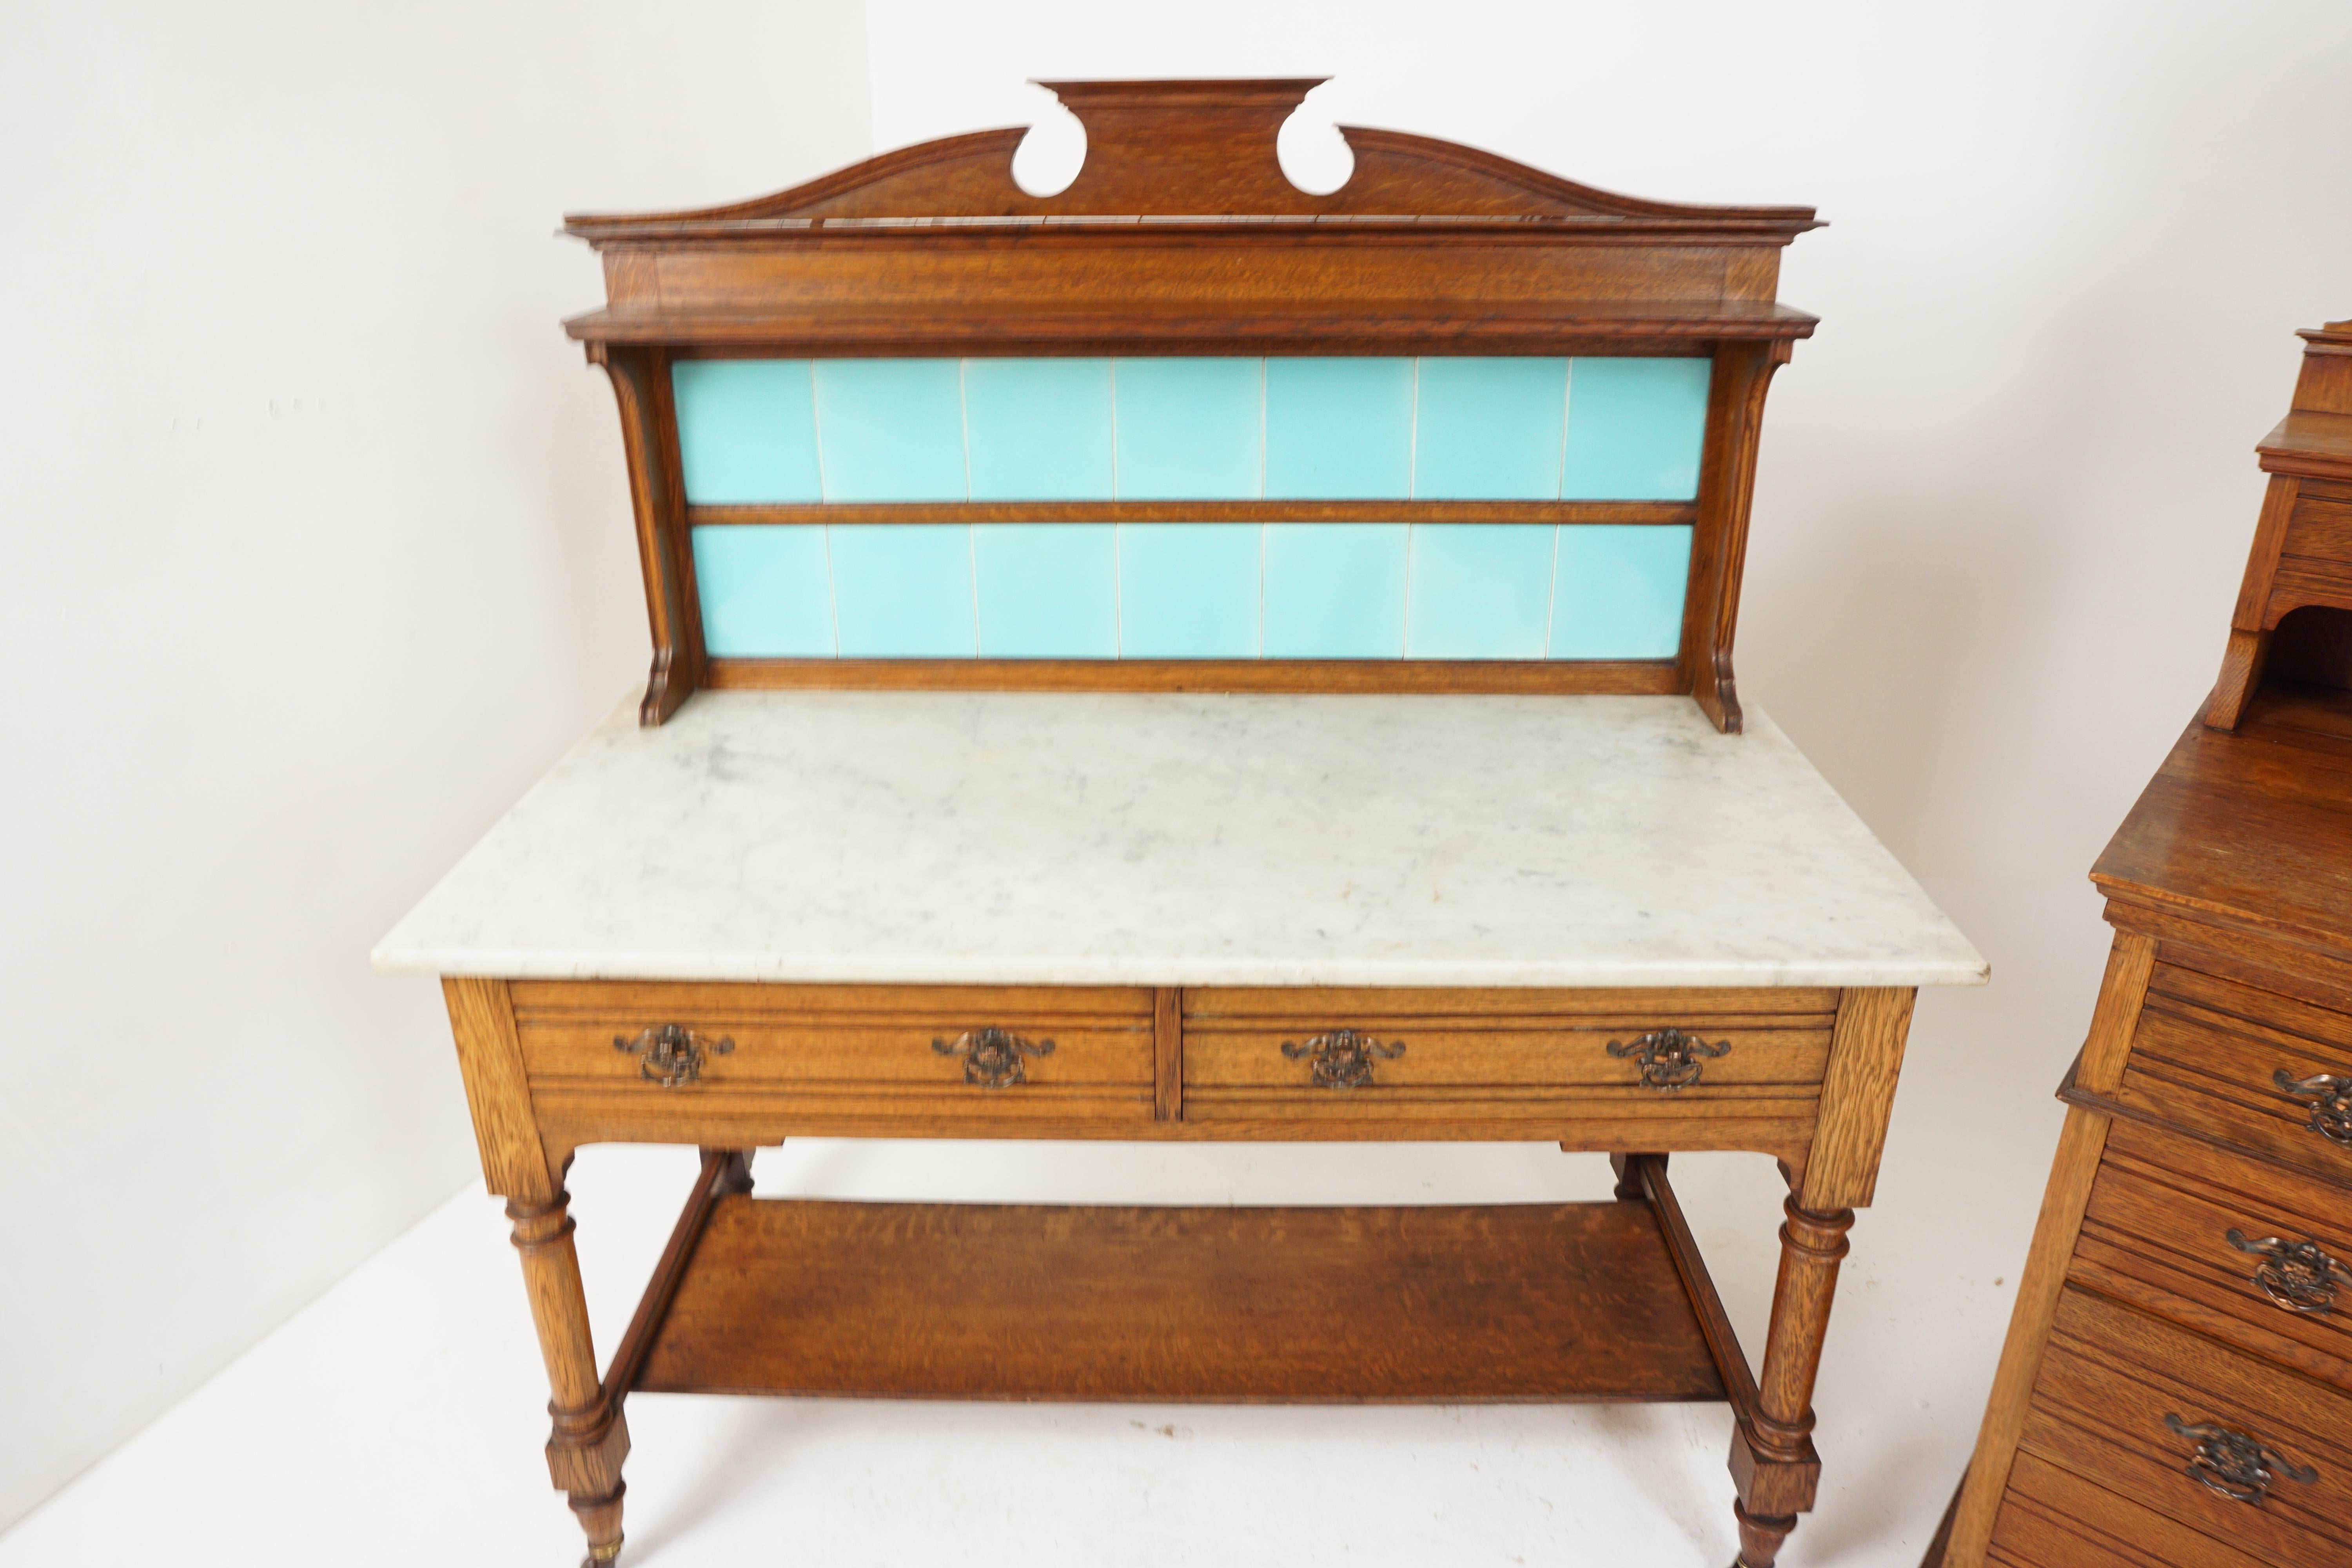 Aesthetic Movement Tiger Oak Marble Top Washstand, Maple & Co London, England 1900, H540

England 1900
Solid oak
Original finish
Shaped pediment on top
Shelf below
Tiles to the back splash
White marble to the base
Pair of dovetailed drawers
With